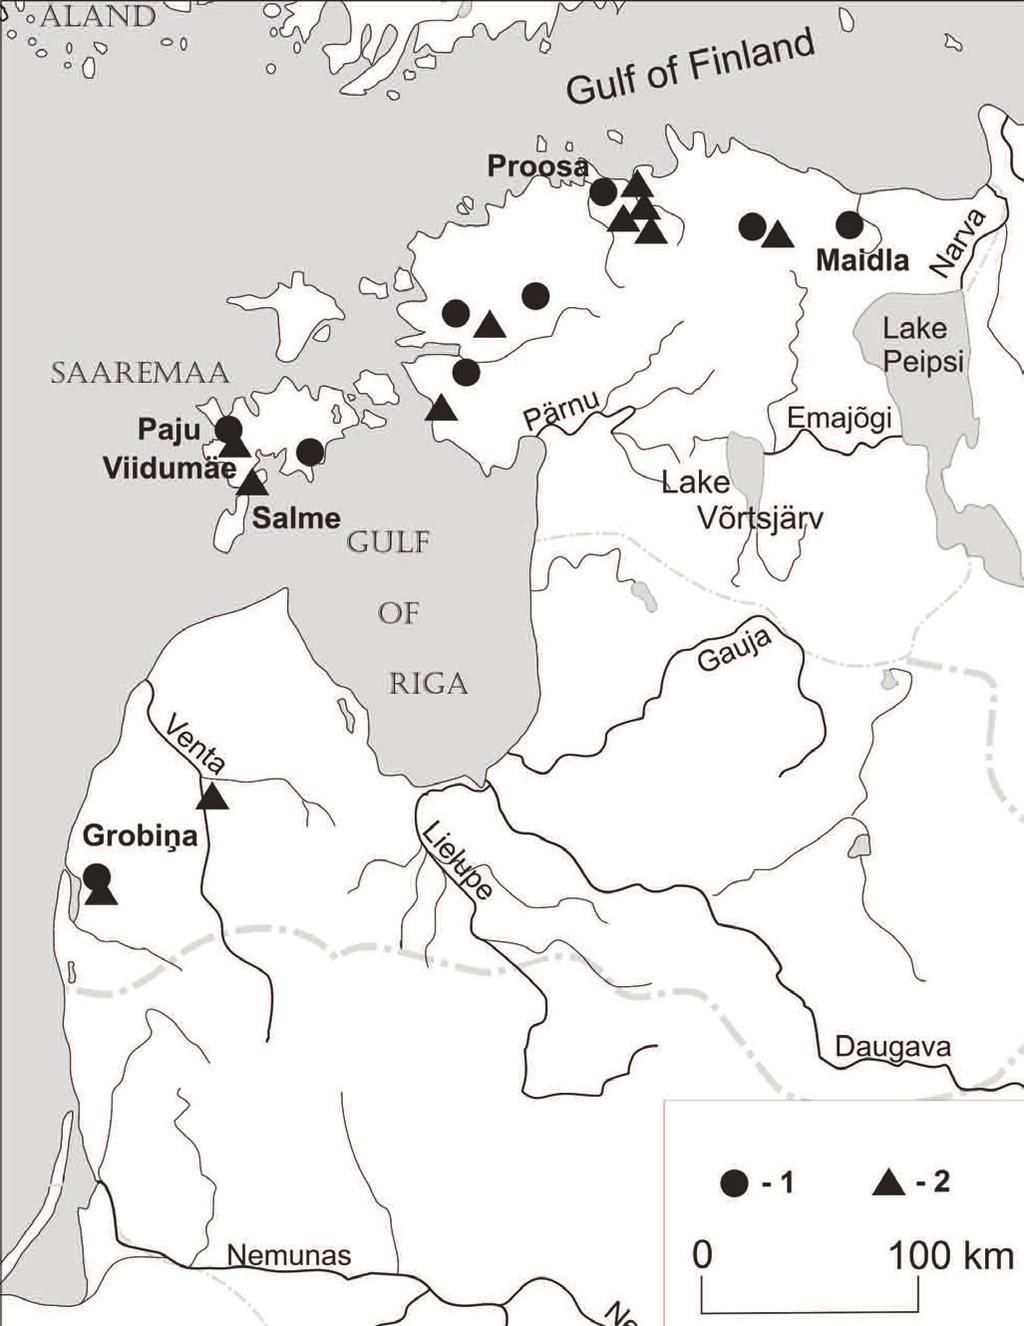 258 Indrek Jets & Marika Mägi Fig. 1. The distribution across Estonia and Latvia of 5th to 9th century artefacts decorated in Scandinavian animal styles. 1) Salin s Style I.